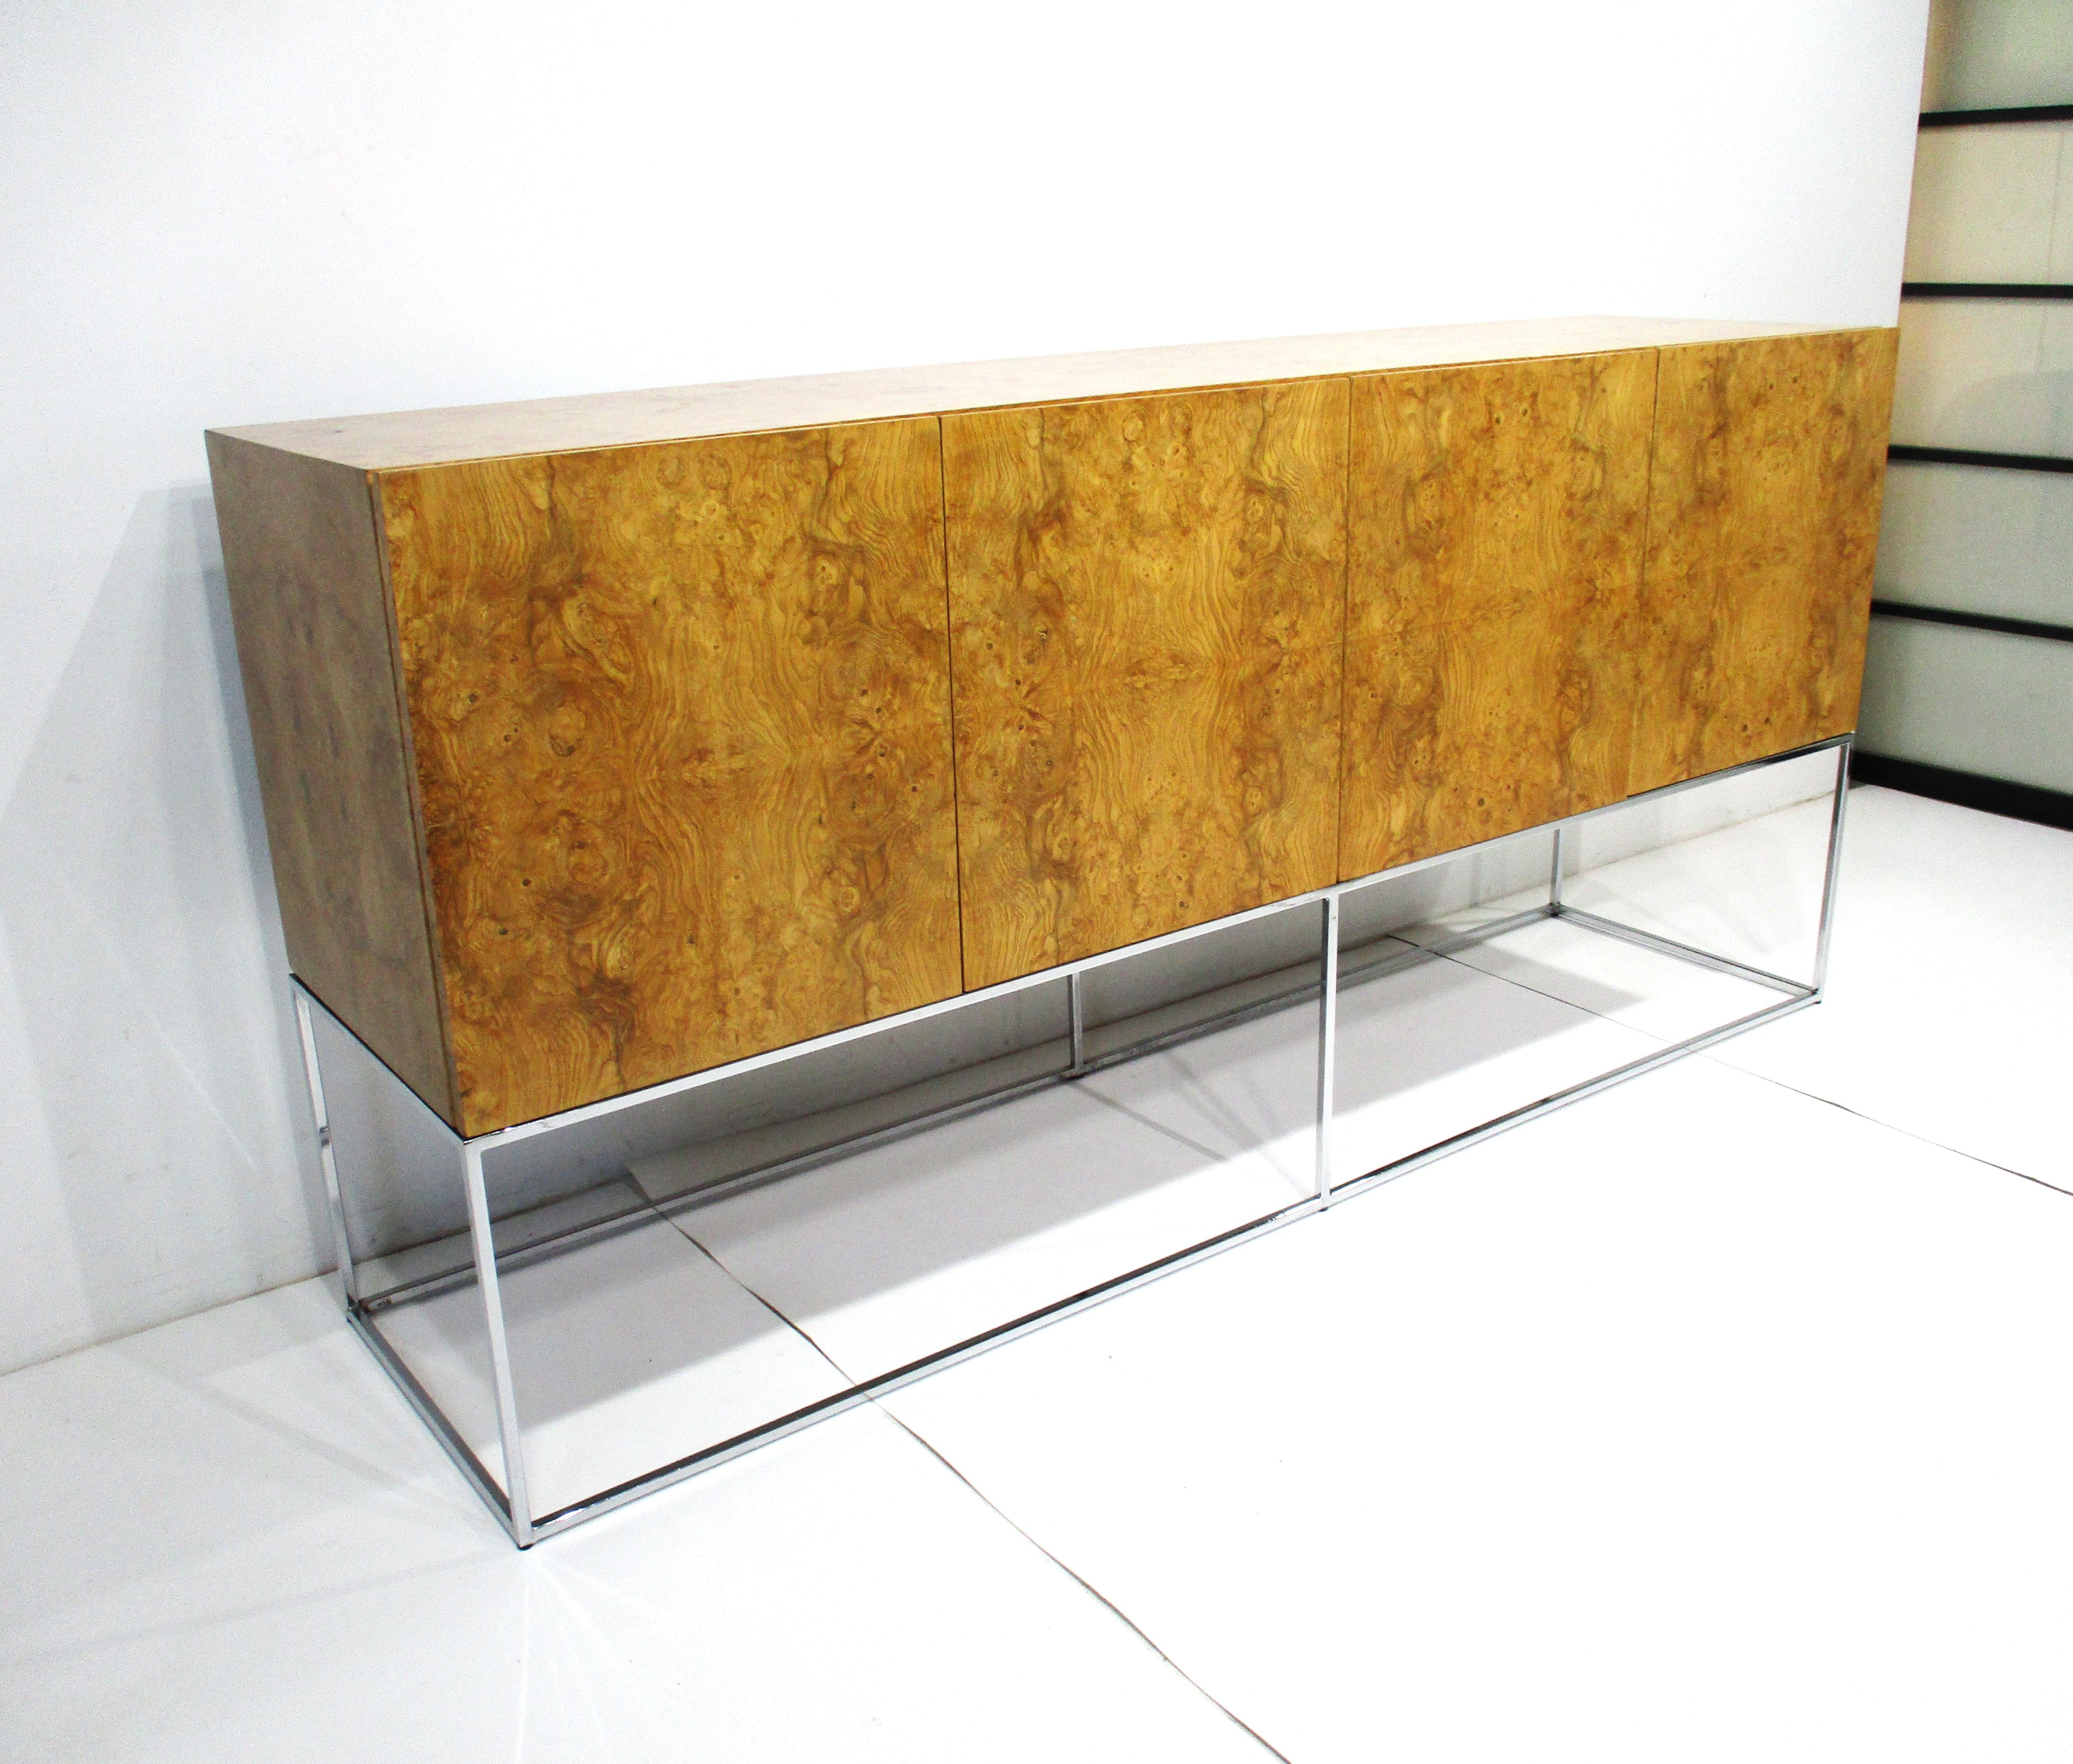 A beautifully book matched four door olive burlwood credenza or server floating on a polished chrome squared tubed steel base having two drawers and storage with two adjustable shelves. By Milo Baughman this is one of his most sought after designs